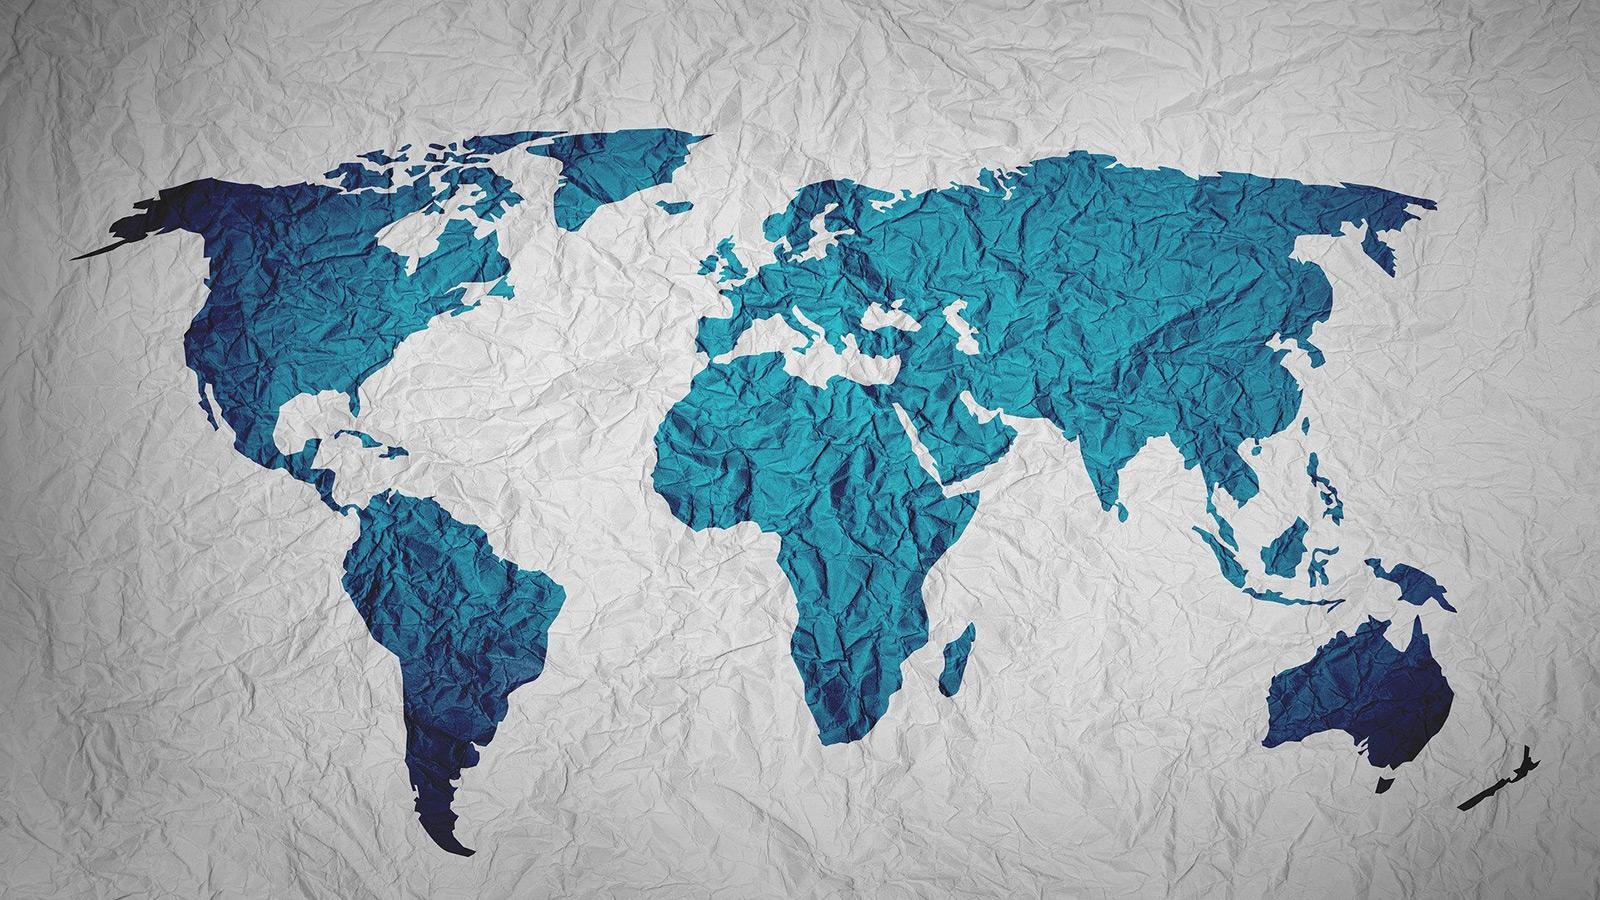 Map of the world, Image by Yuri B from Pixabay